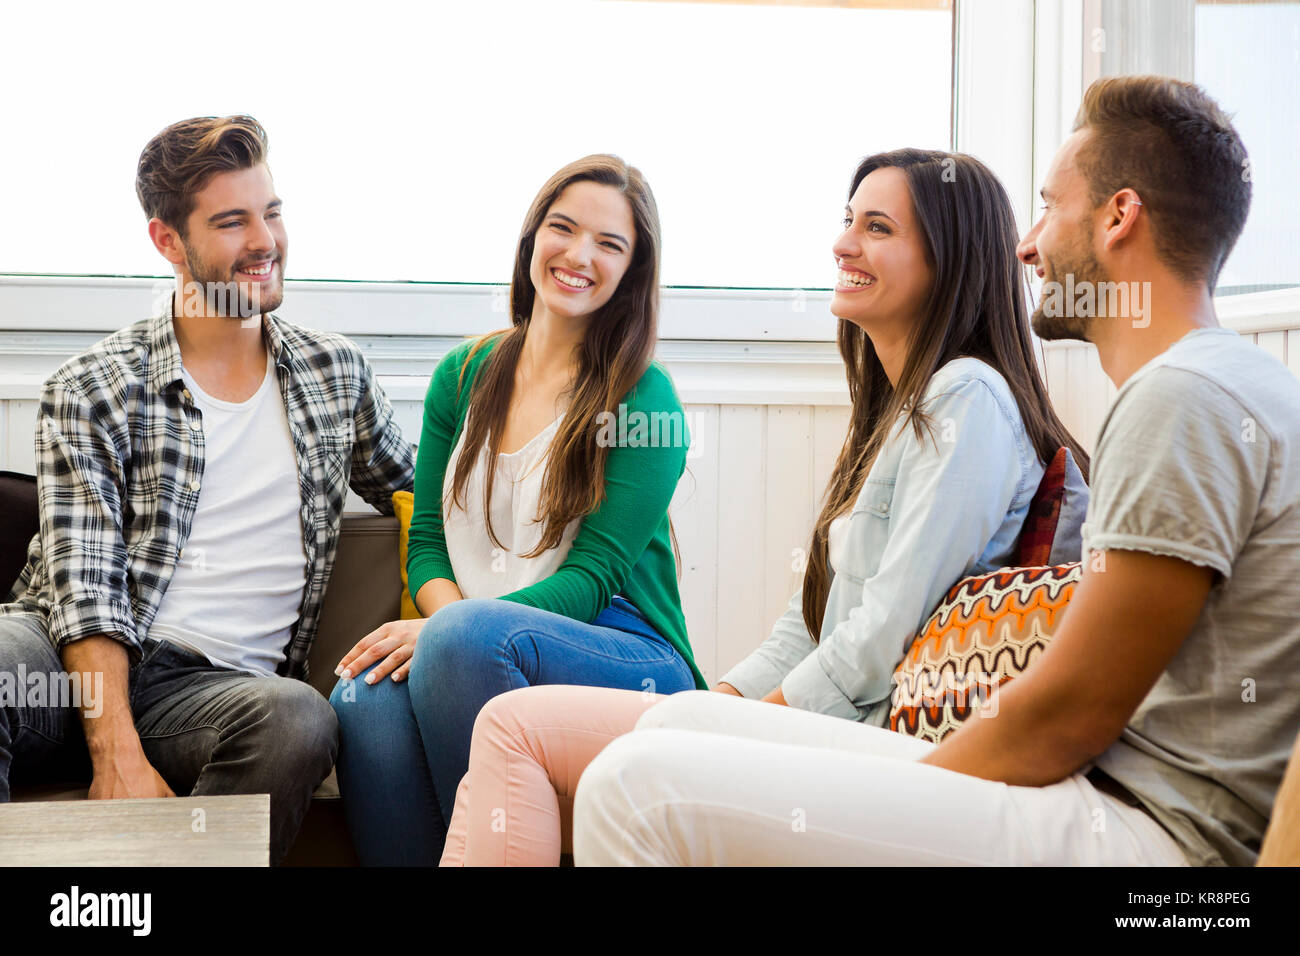 Meeting With Friends Stock Photo Alamy